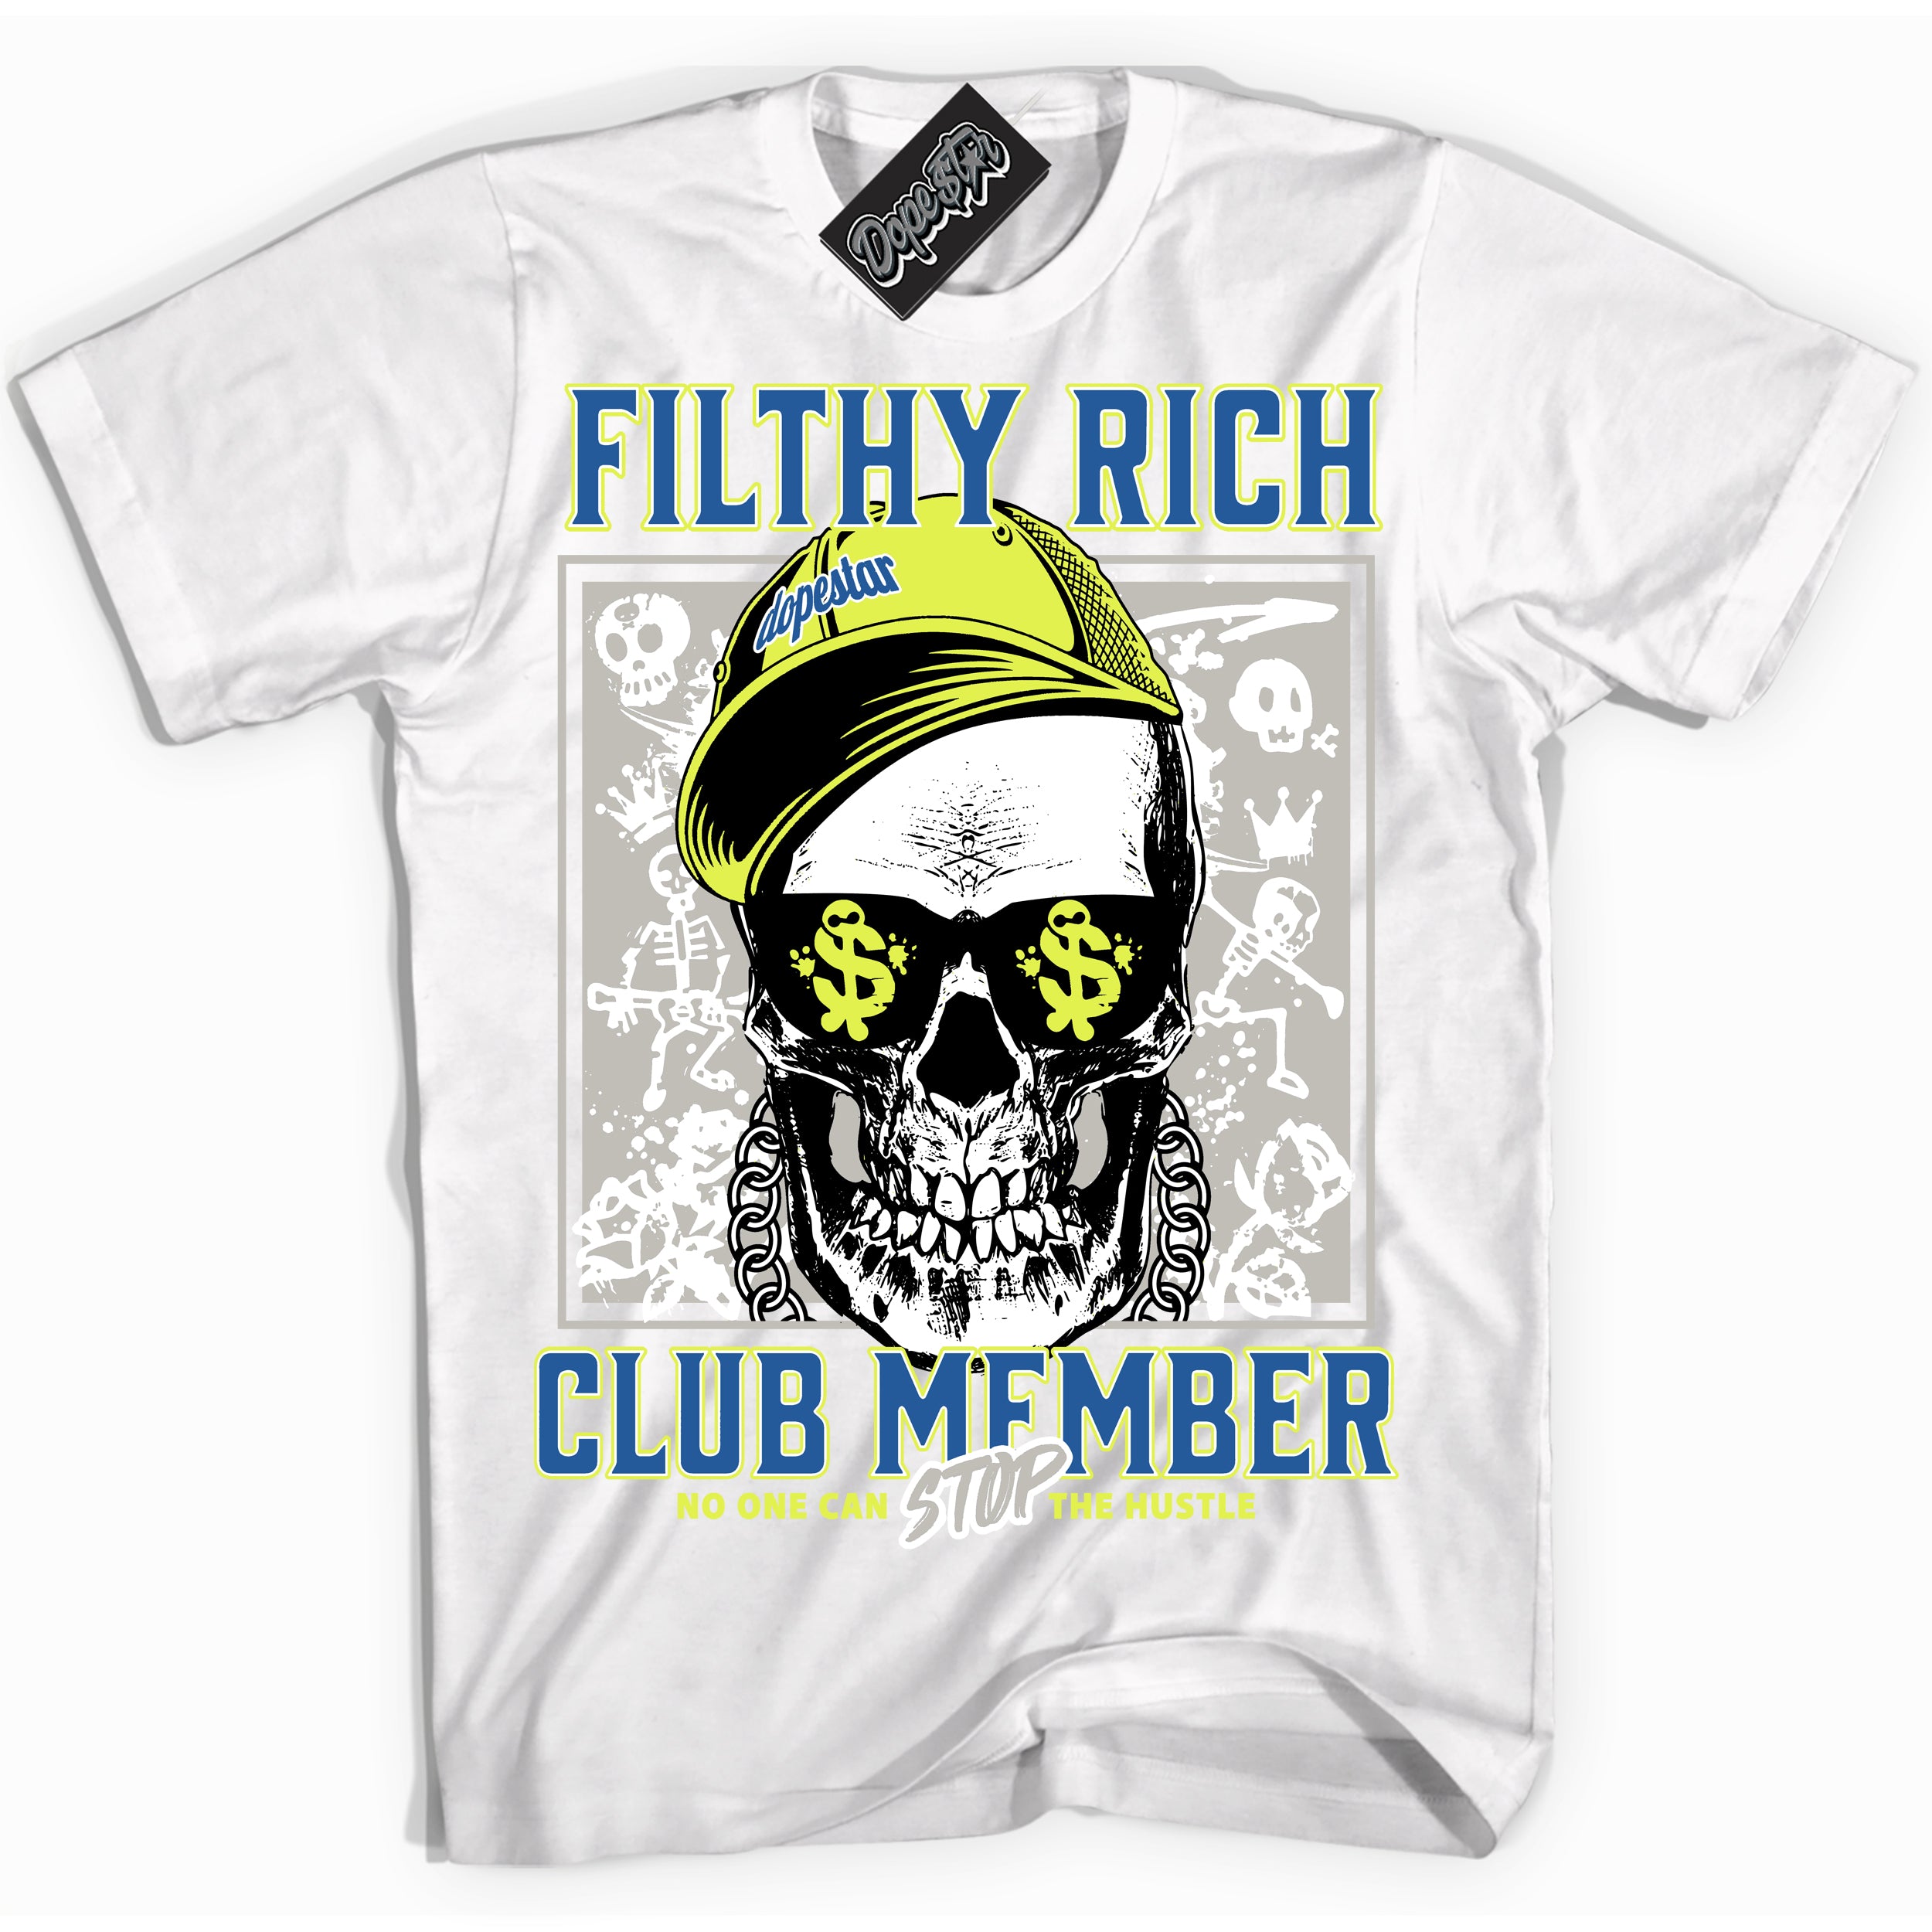 Cool White Shirt with “ Filthy Rich” design that perfectly matches '86 Air Max Day 1s Sneakers.